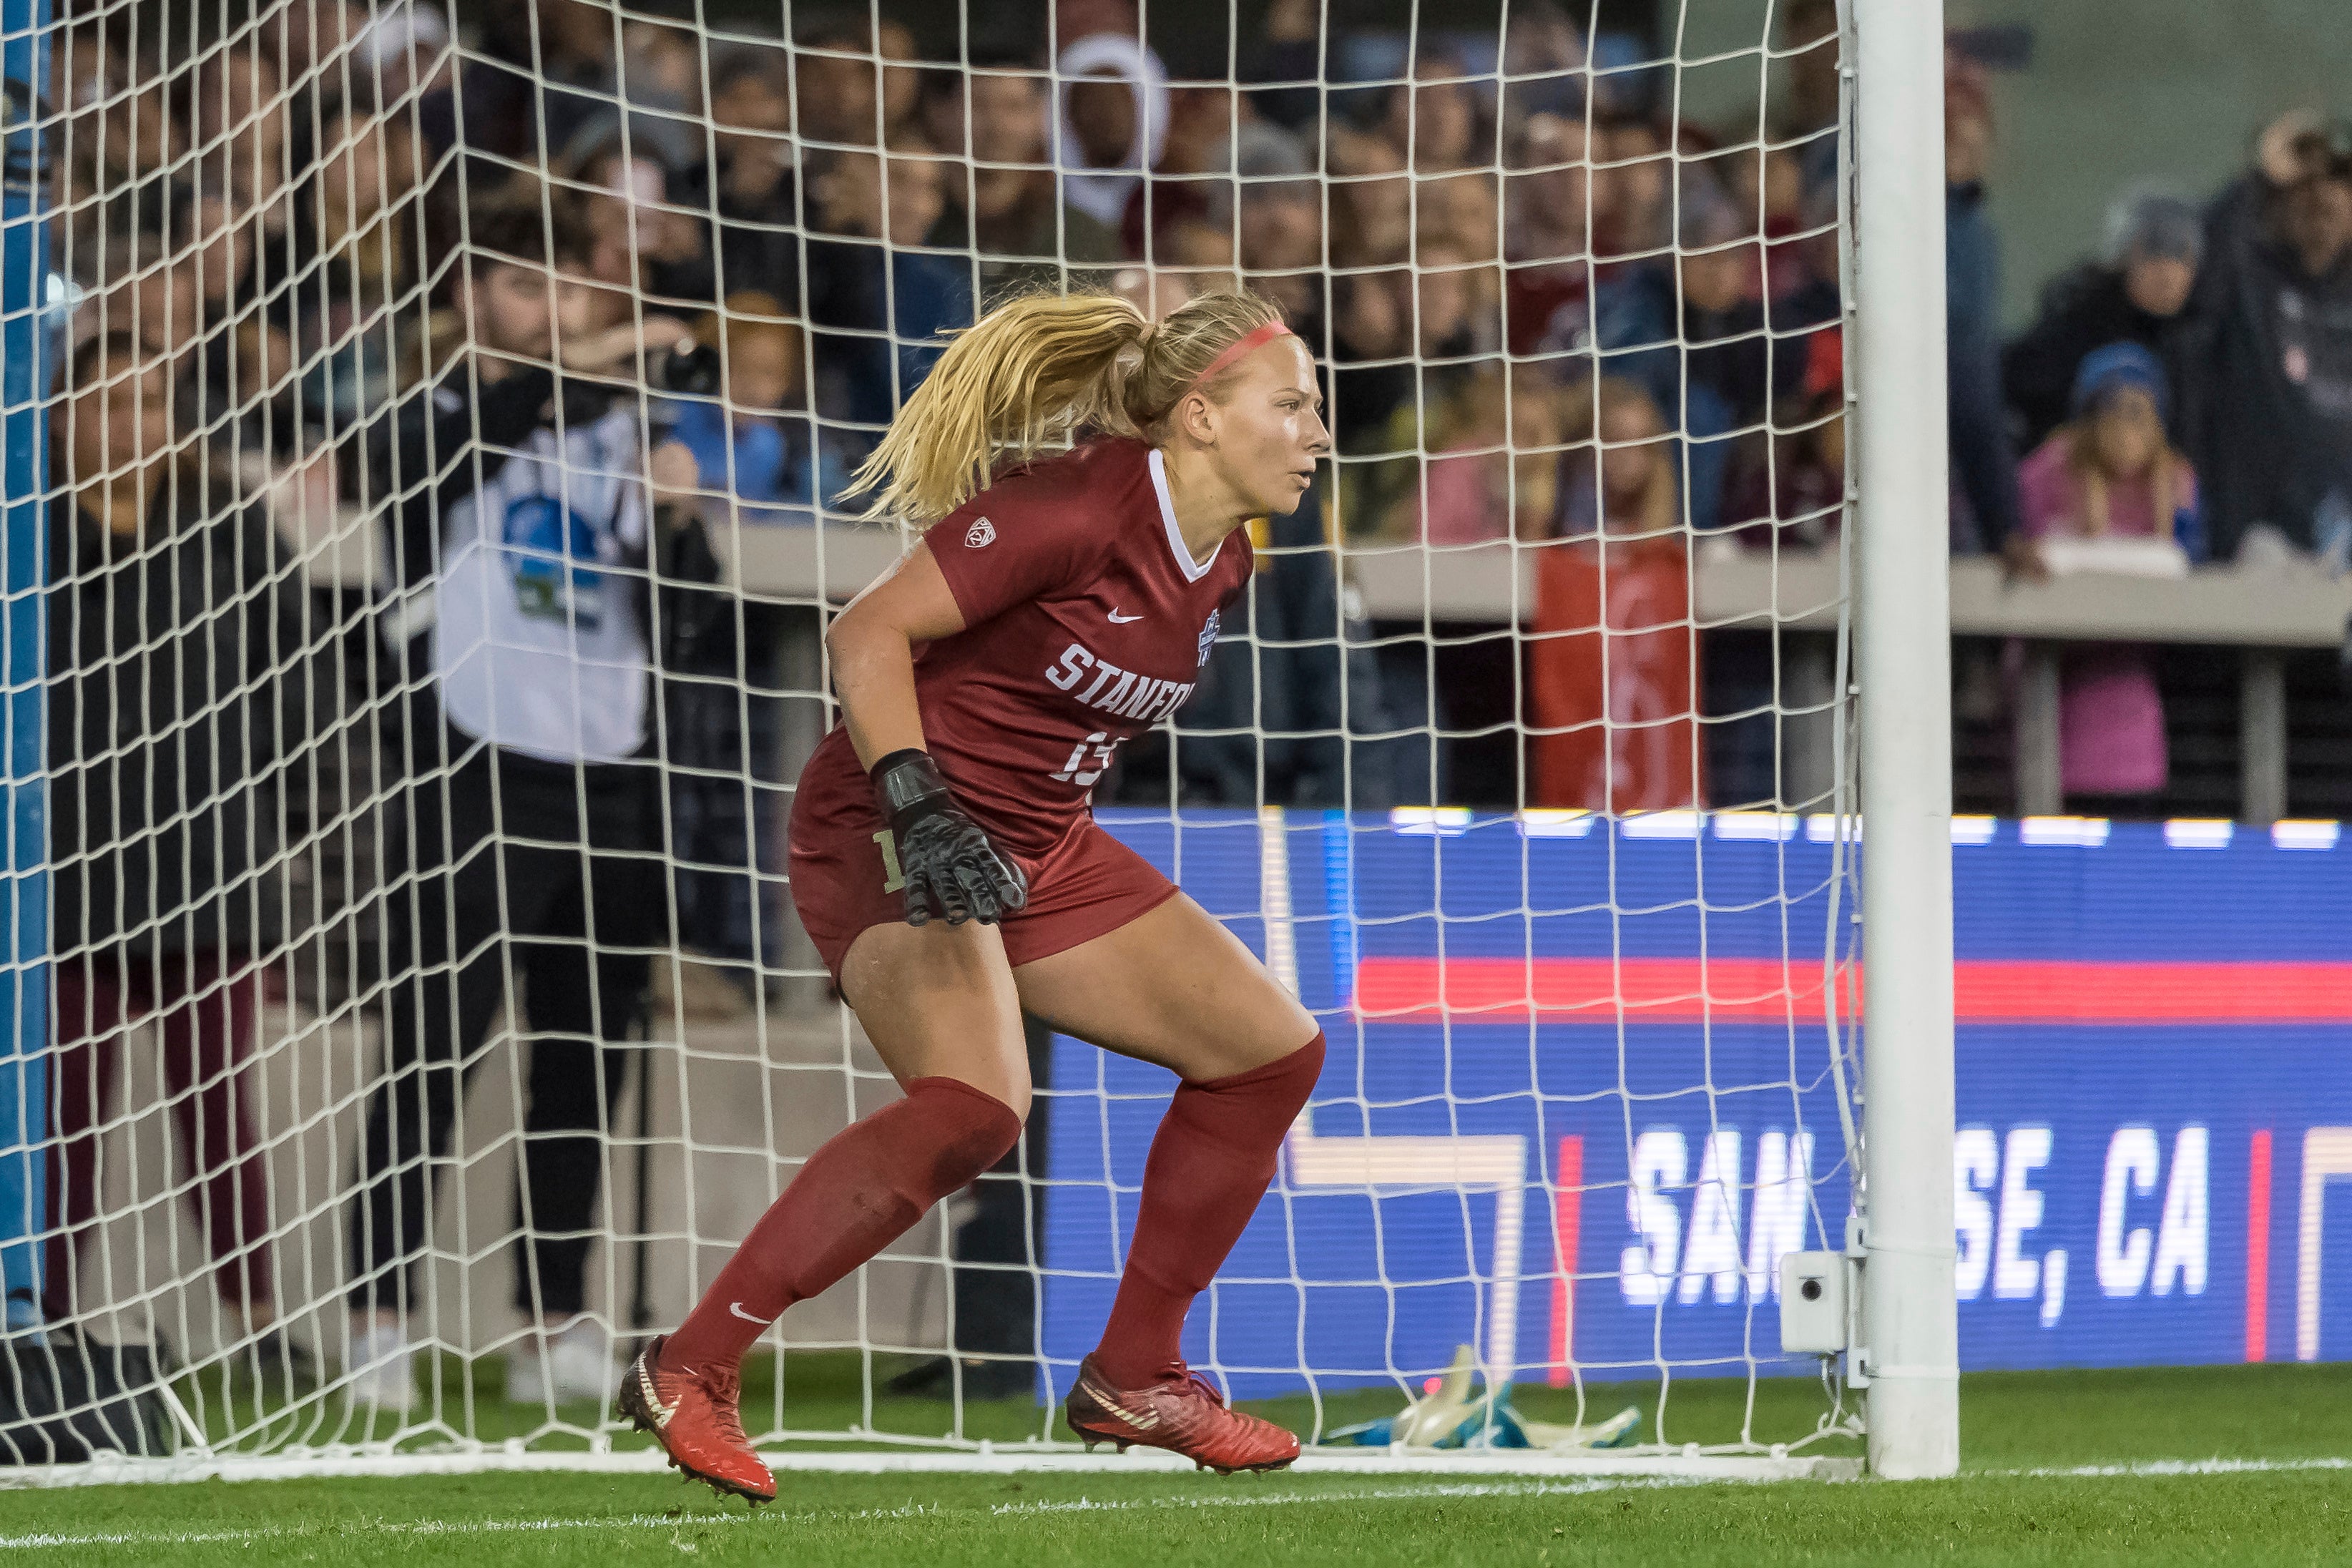 In a photo provided by Stanford Athletics, Stanford goalkeeper Katie Meyer guards the goal against North Carolina in the NCAA soccer tournament championship match Dec. 8, 2019, in San Jose, Calif.